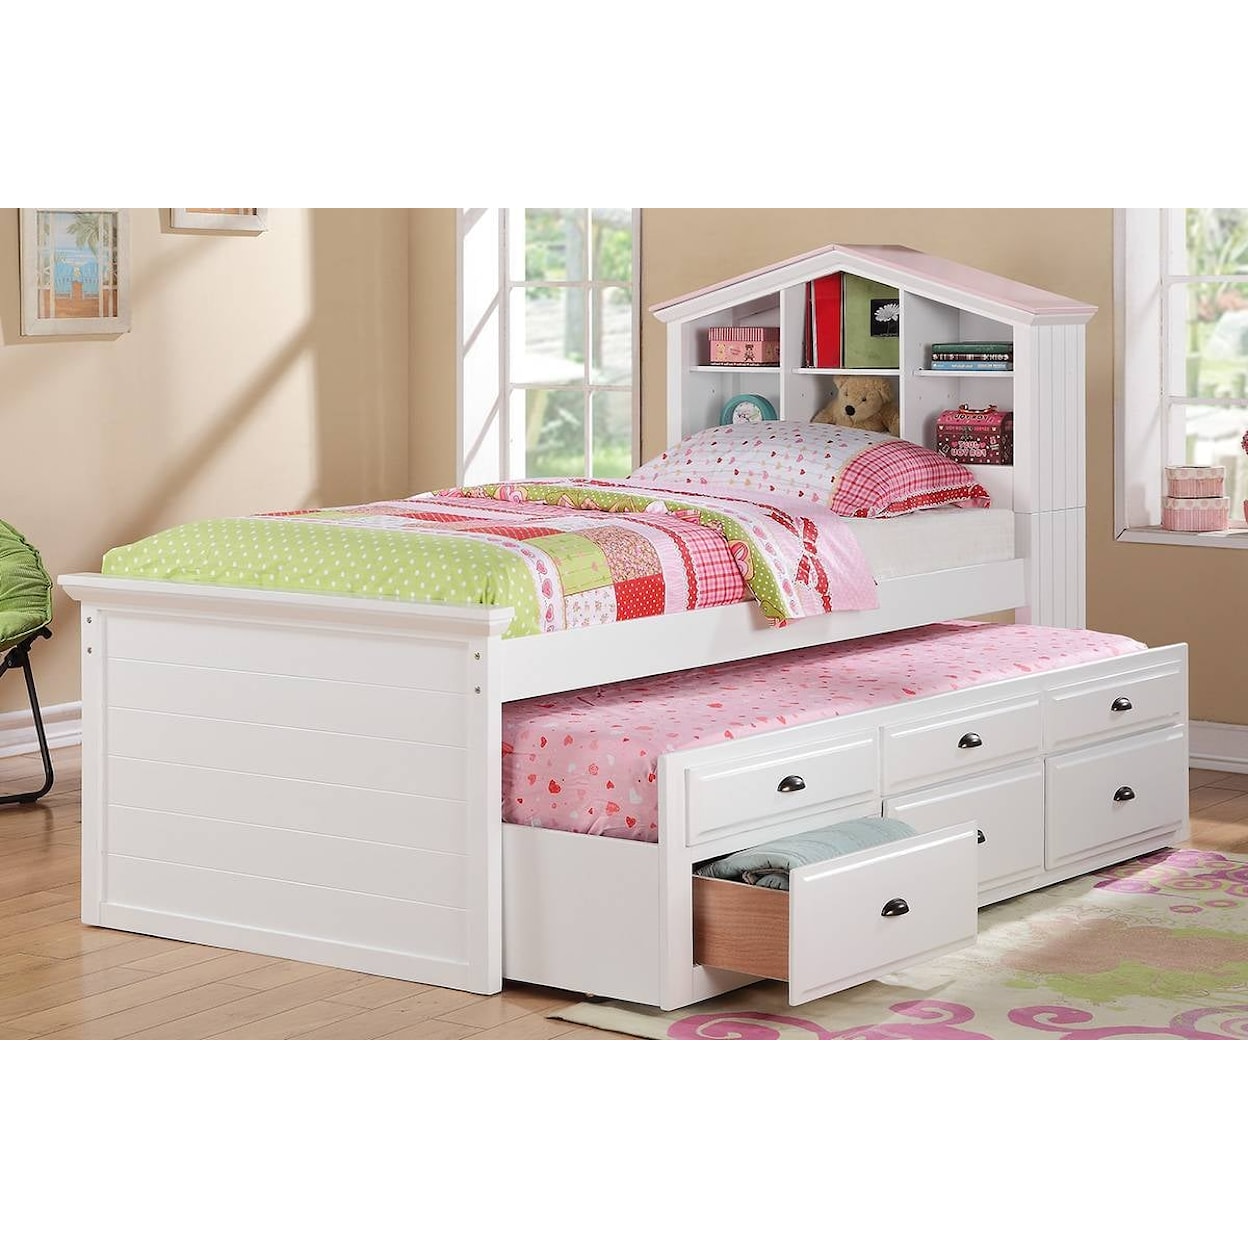 Poundex Trundle Beds NANTUCKET WHITE TWIN TRUNDLE BED |